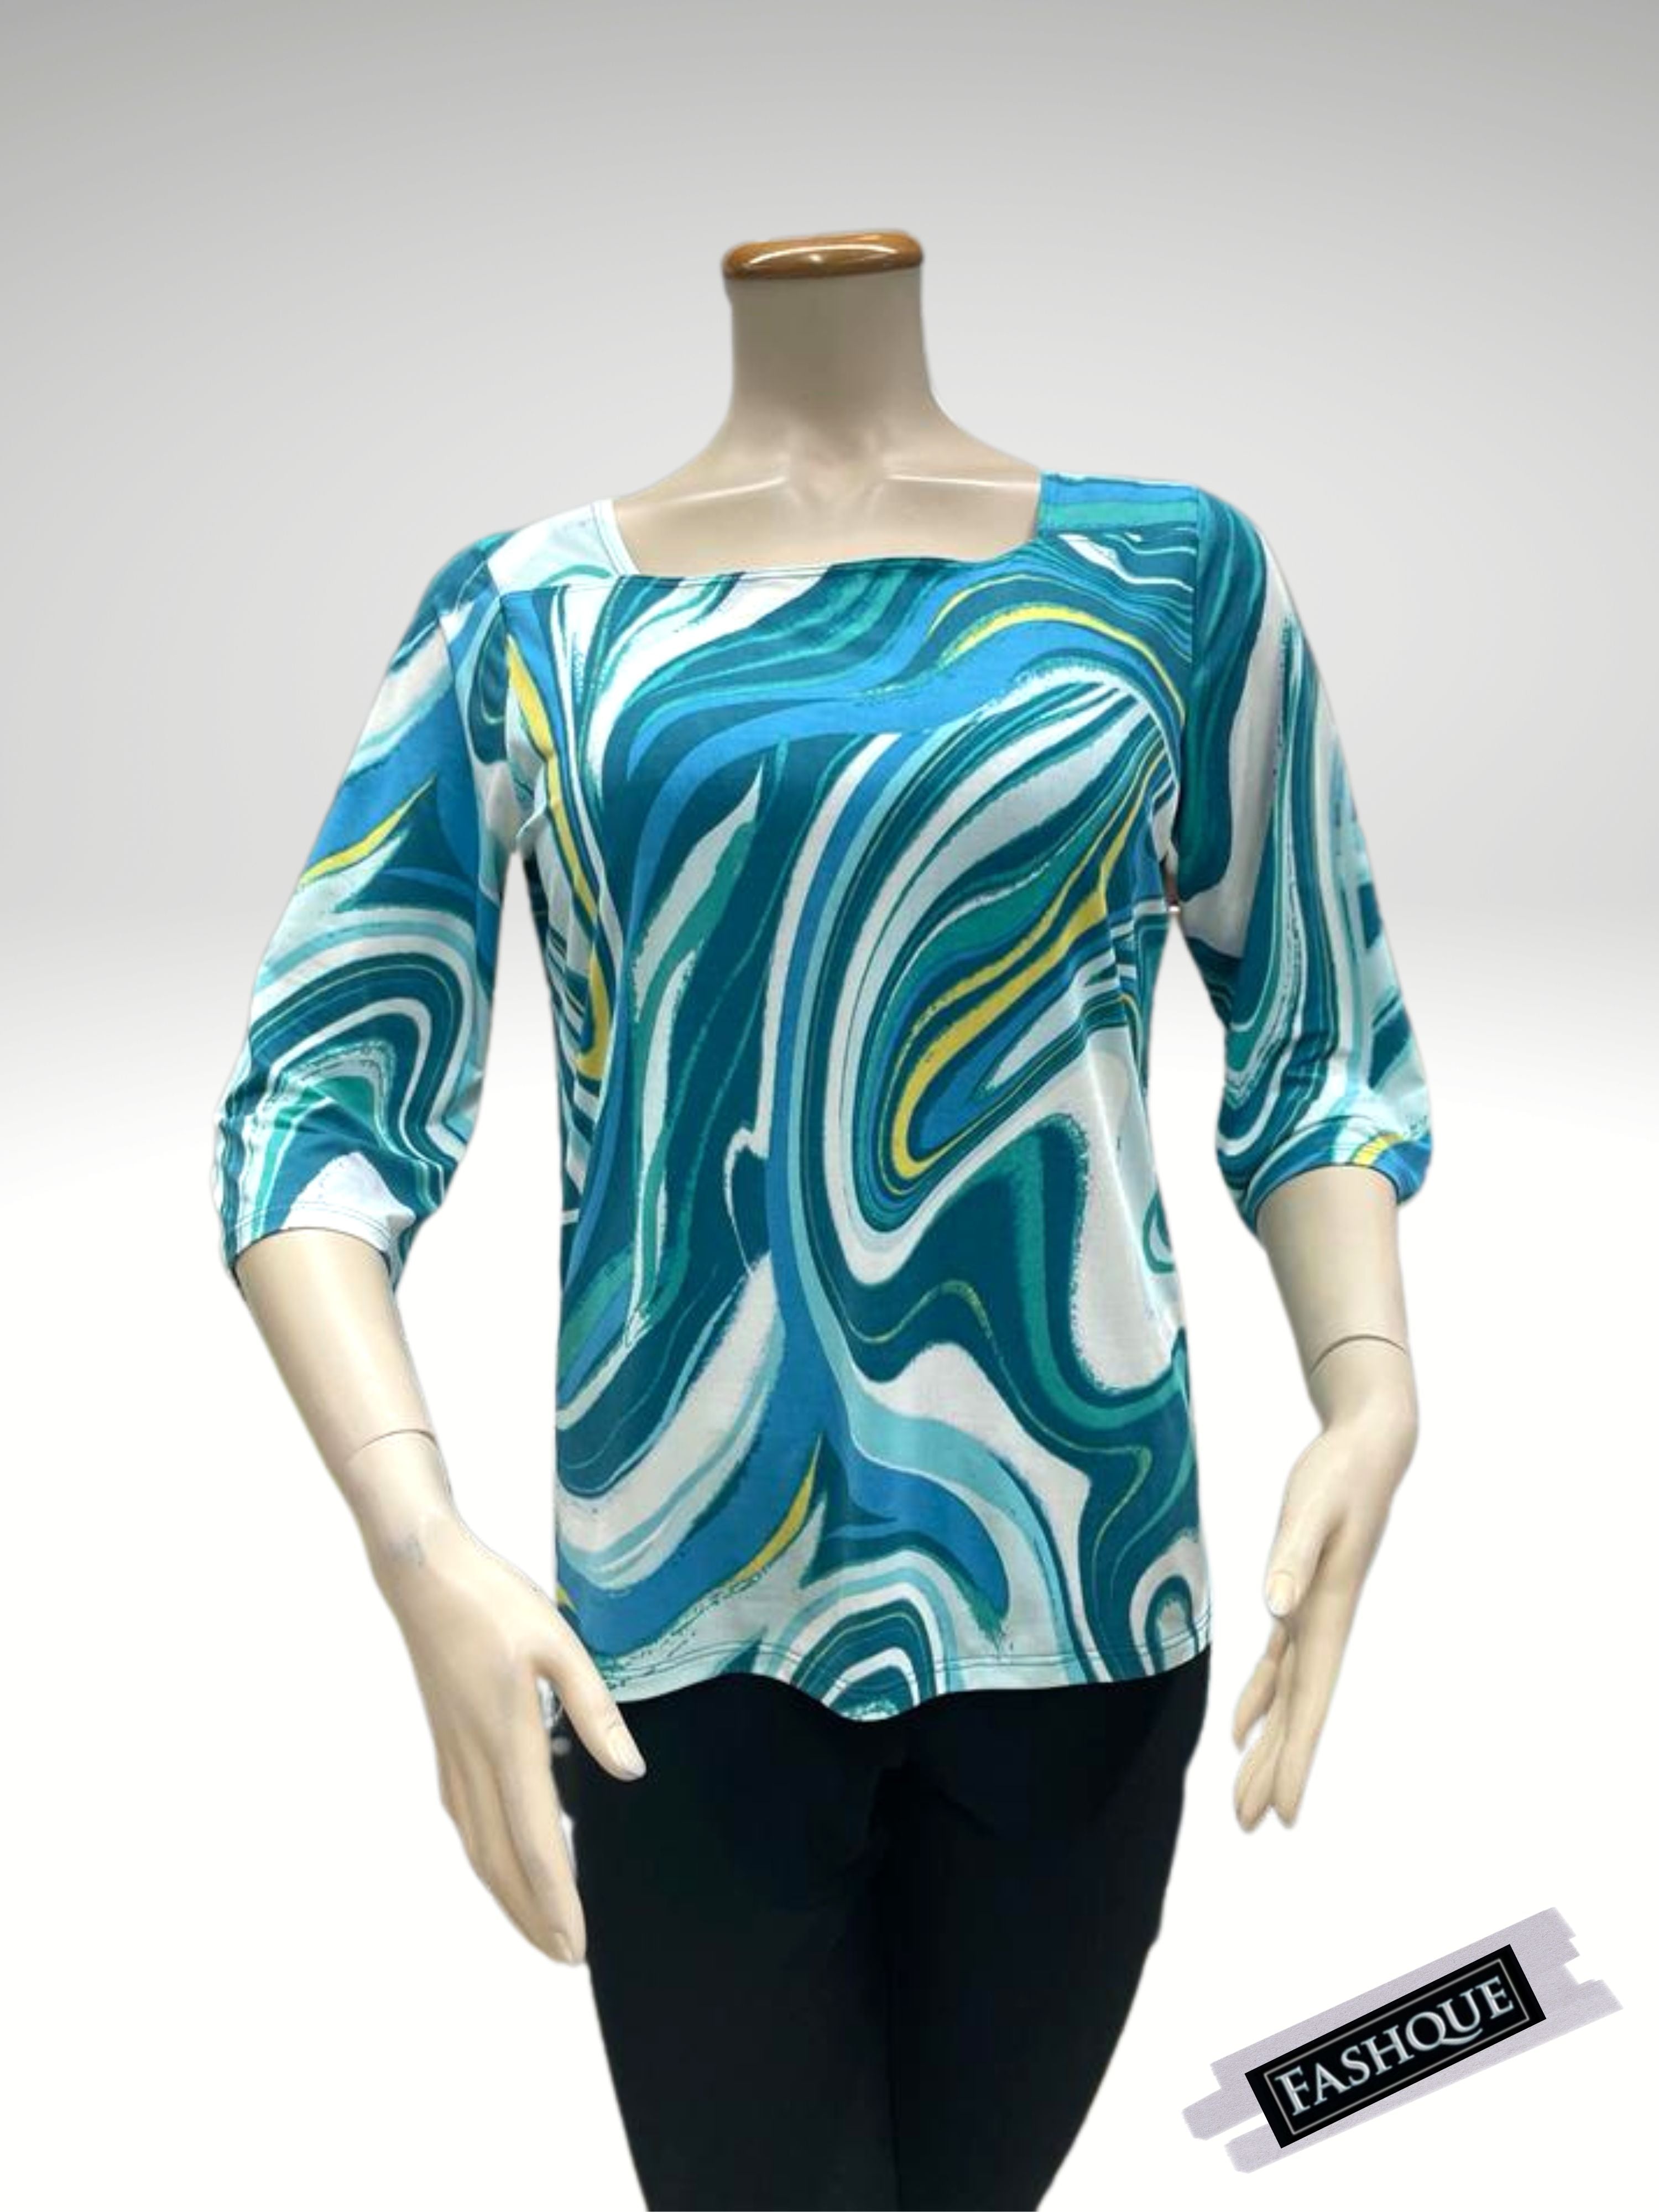 FASHQUE - Square Neck 3/4 Sleeve Top - T544